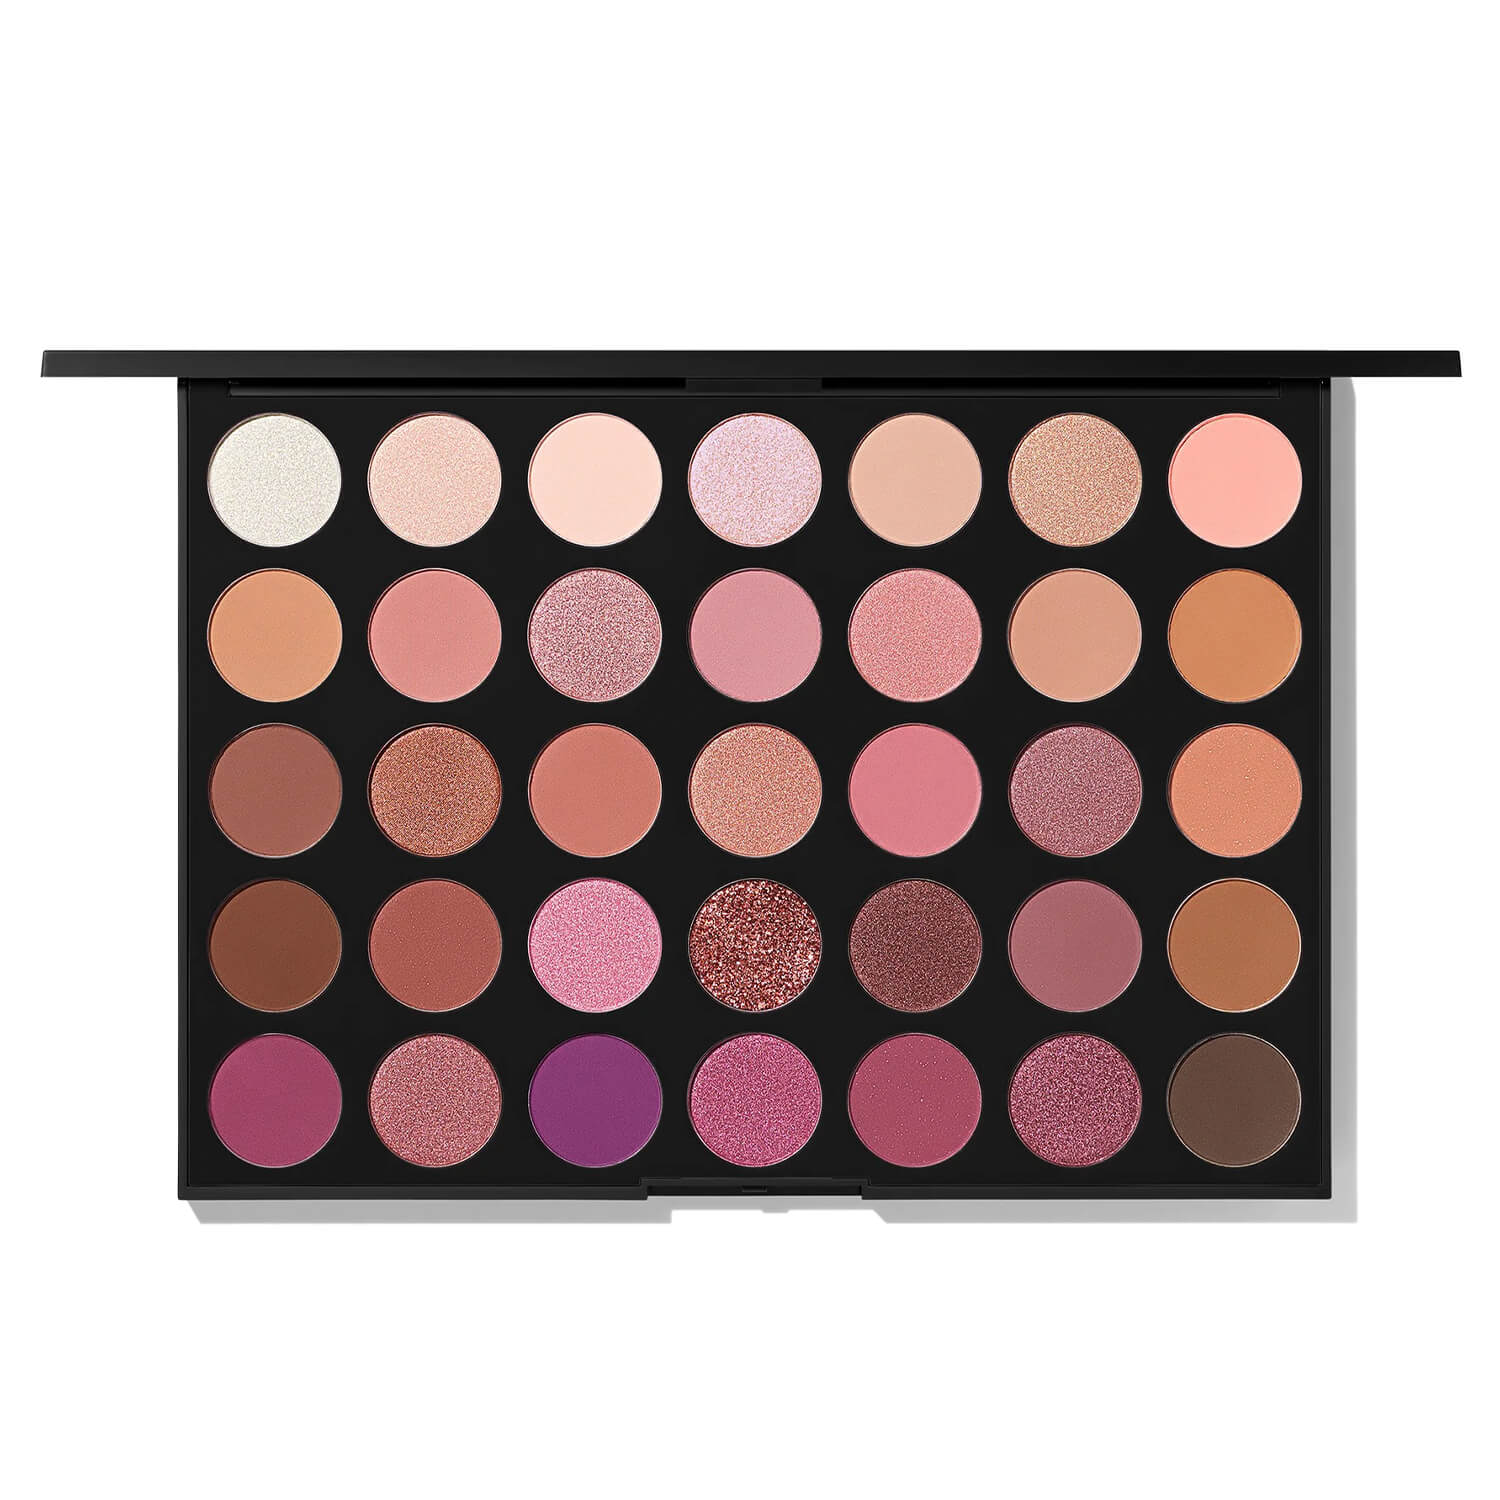 Shop 100% original Morphe 35XO eyeshadow palette available at Heygirl.pk for delivery in Pakistan. 